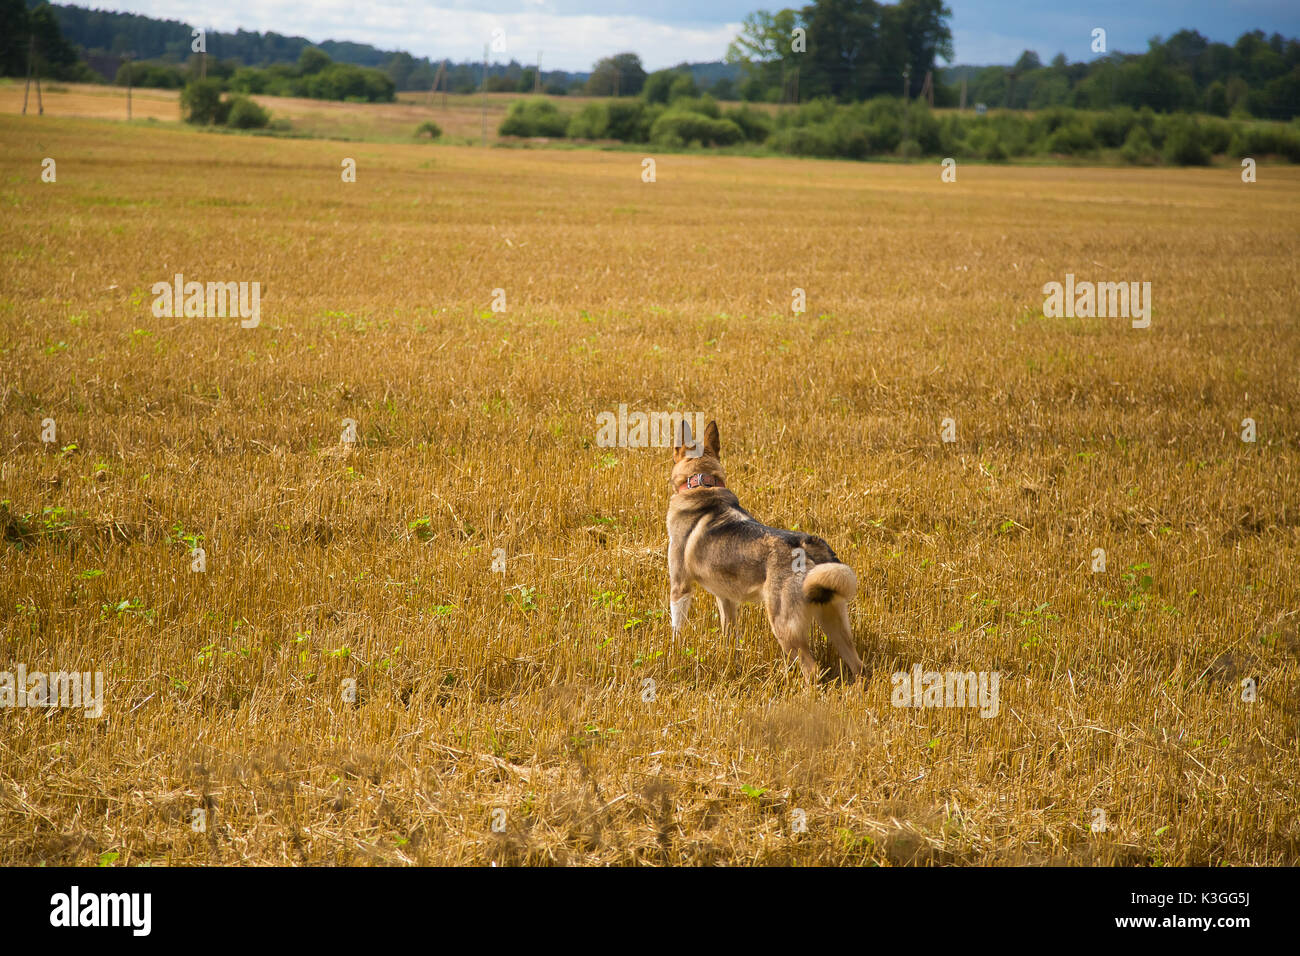 A friendly wolf like hunting dog enjoying free time in the field. Dog walk in the countryside. Stock Photo